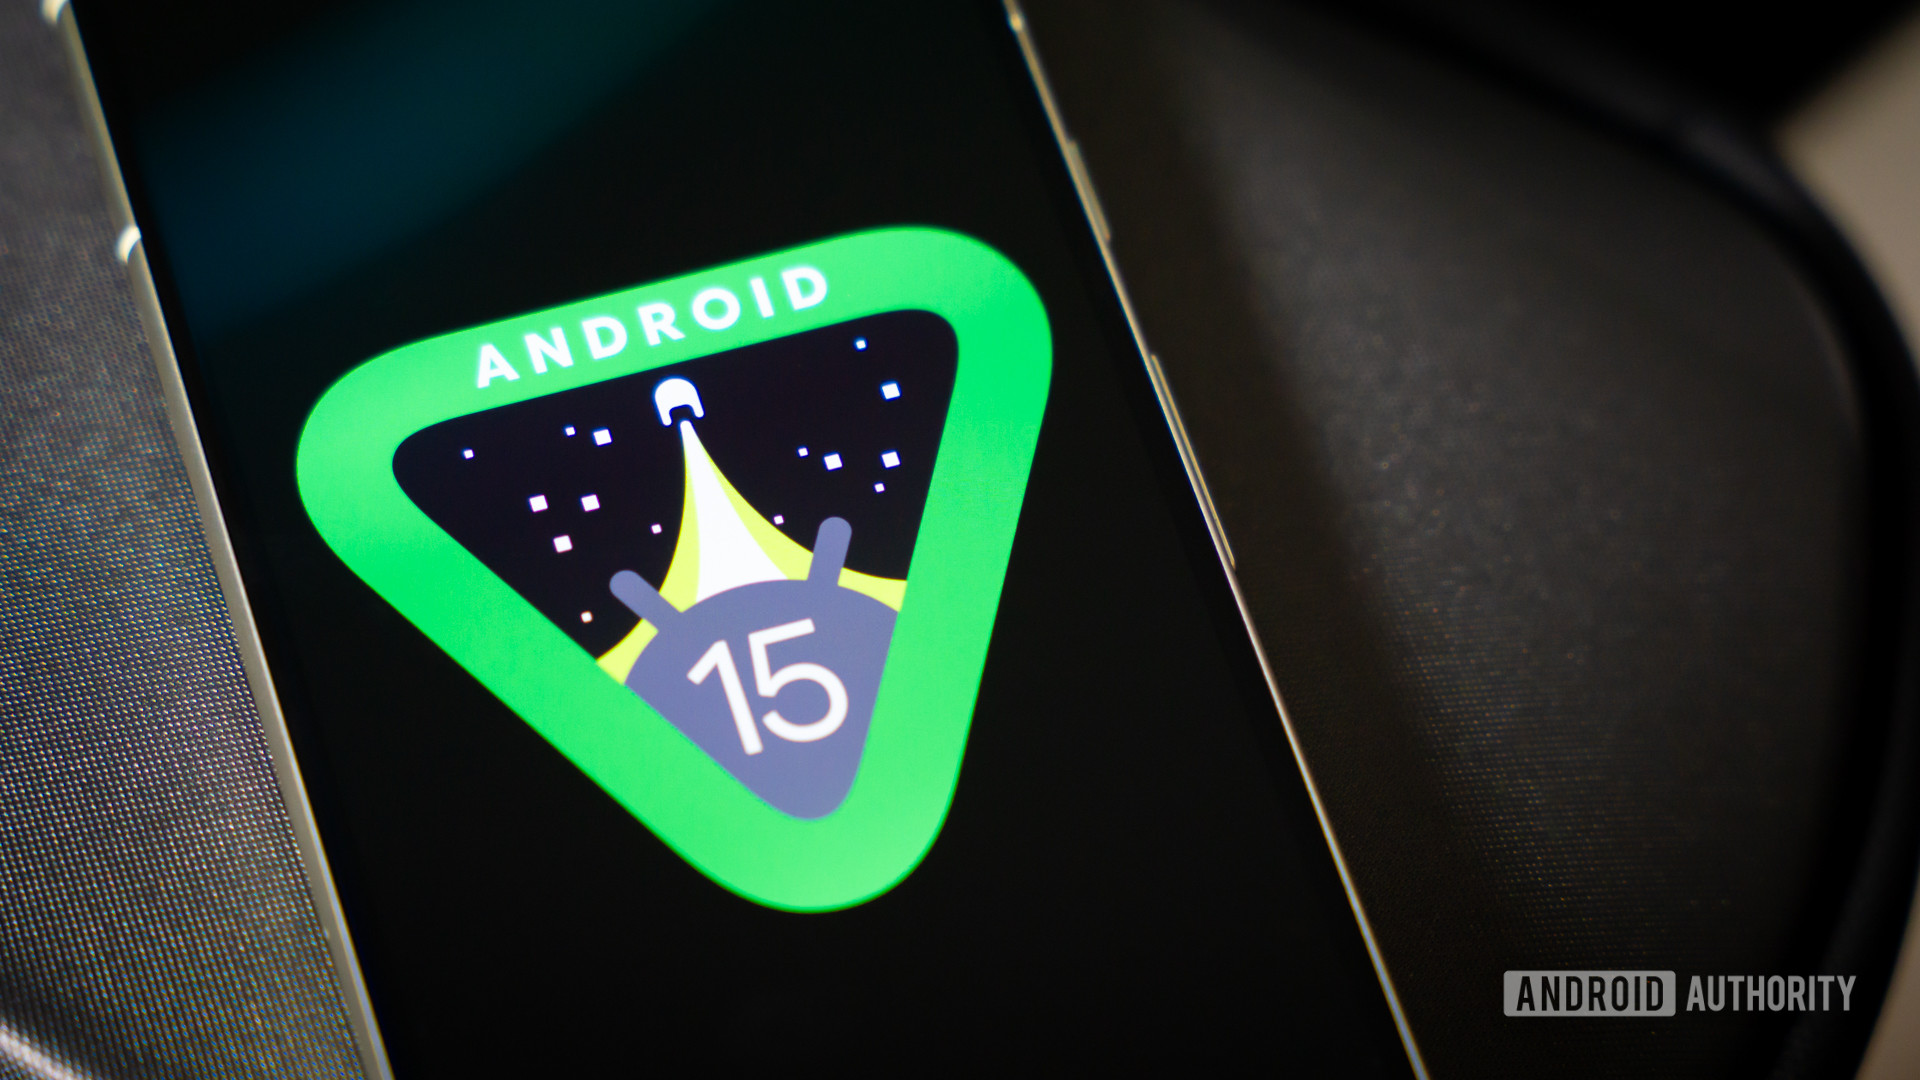 Android 15 logo on smartphone stock photo (11)